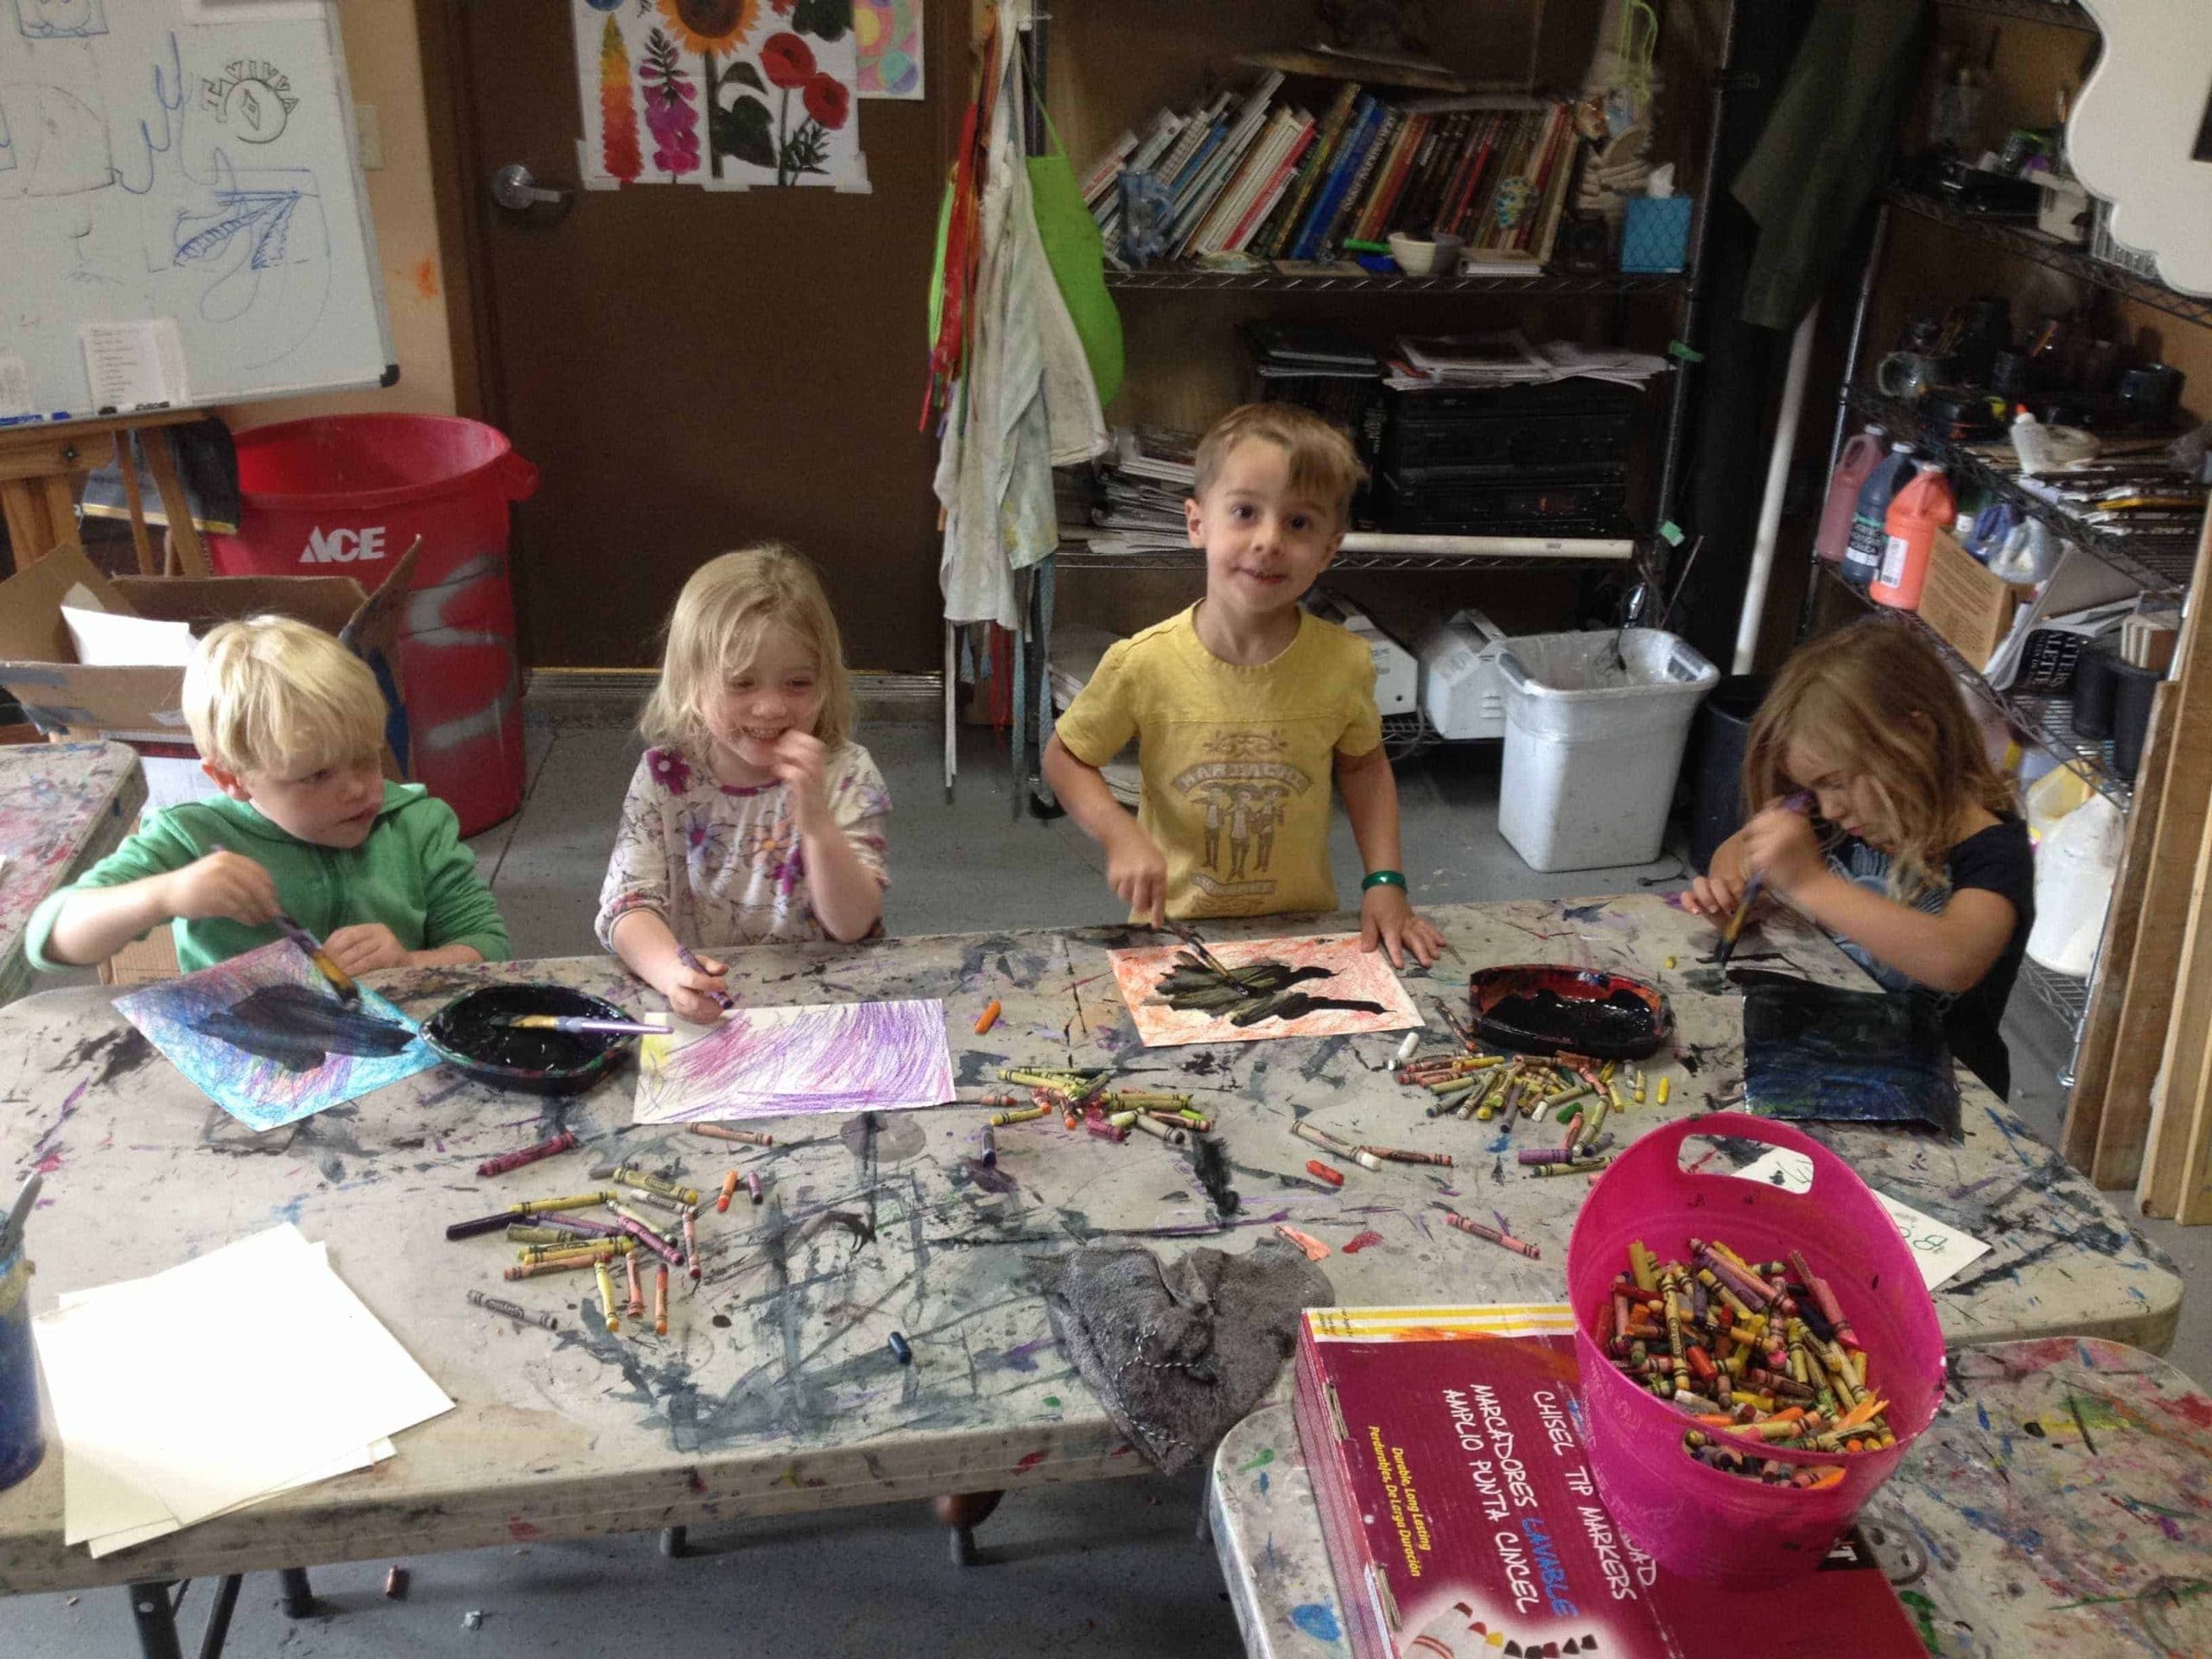 students standing and making art at a desk